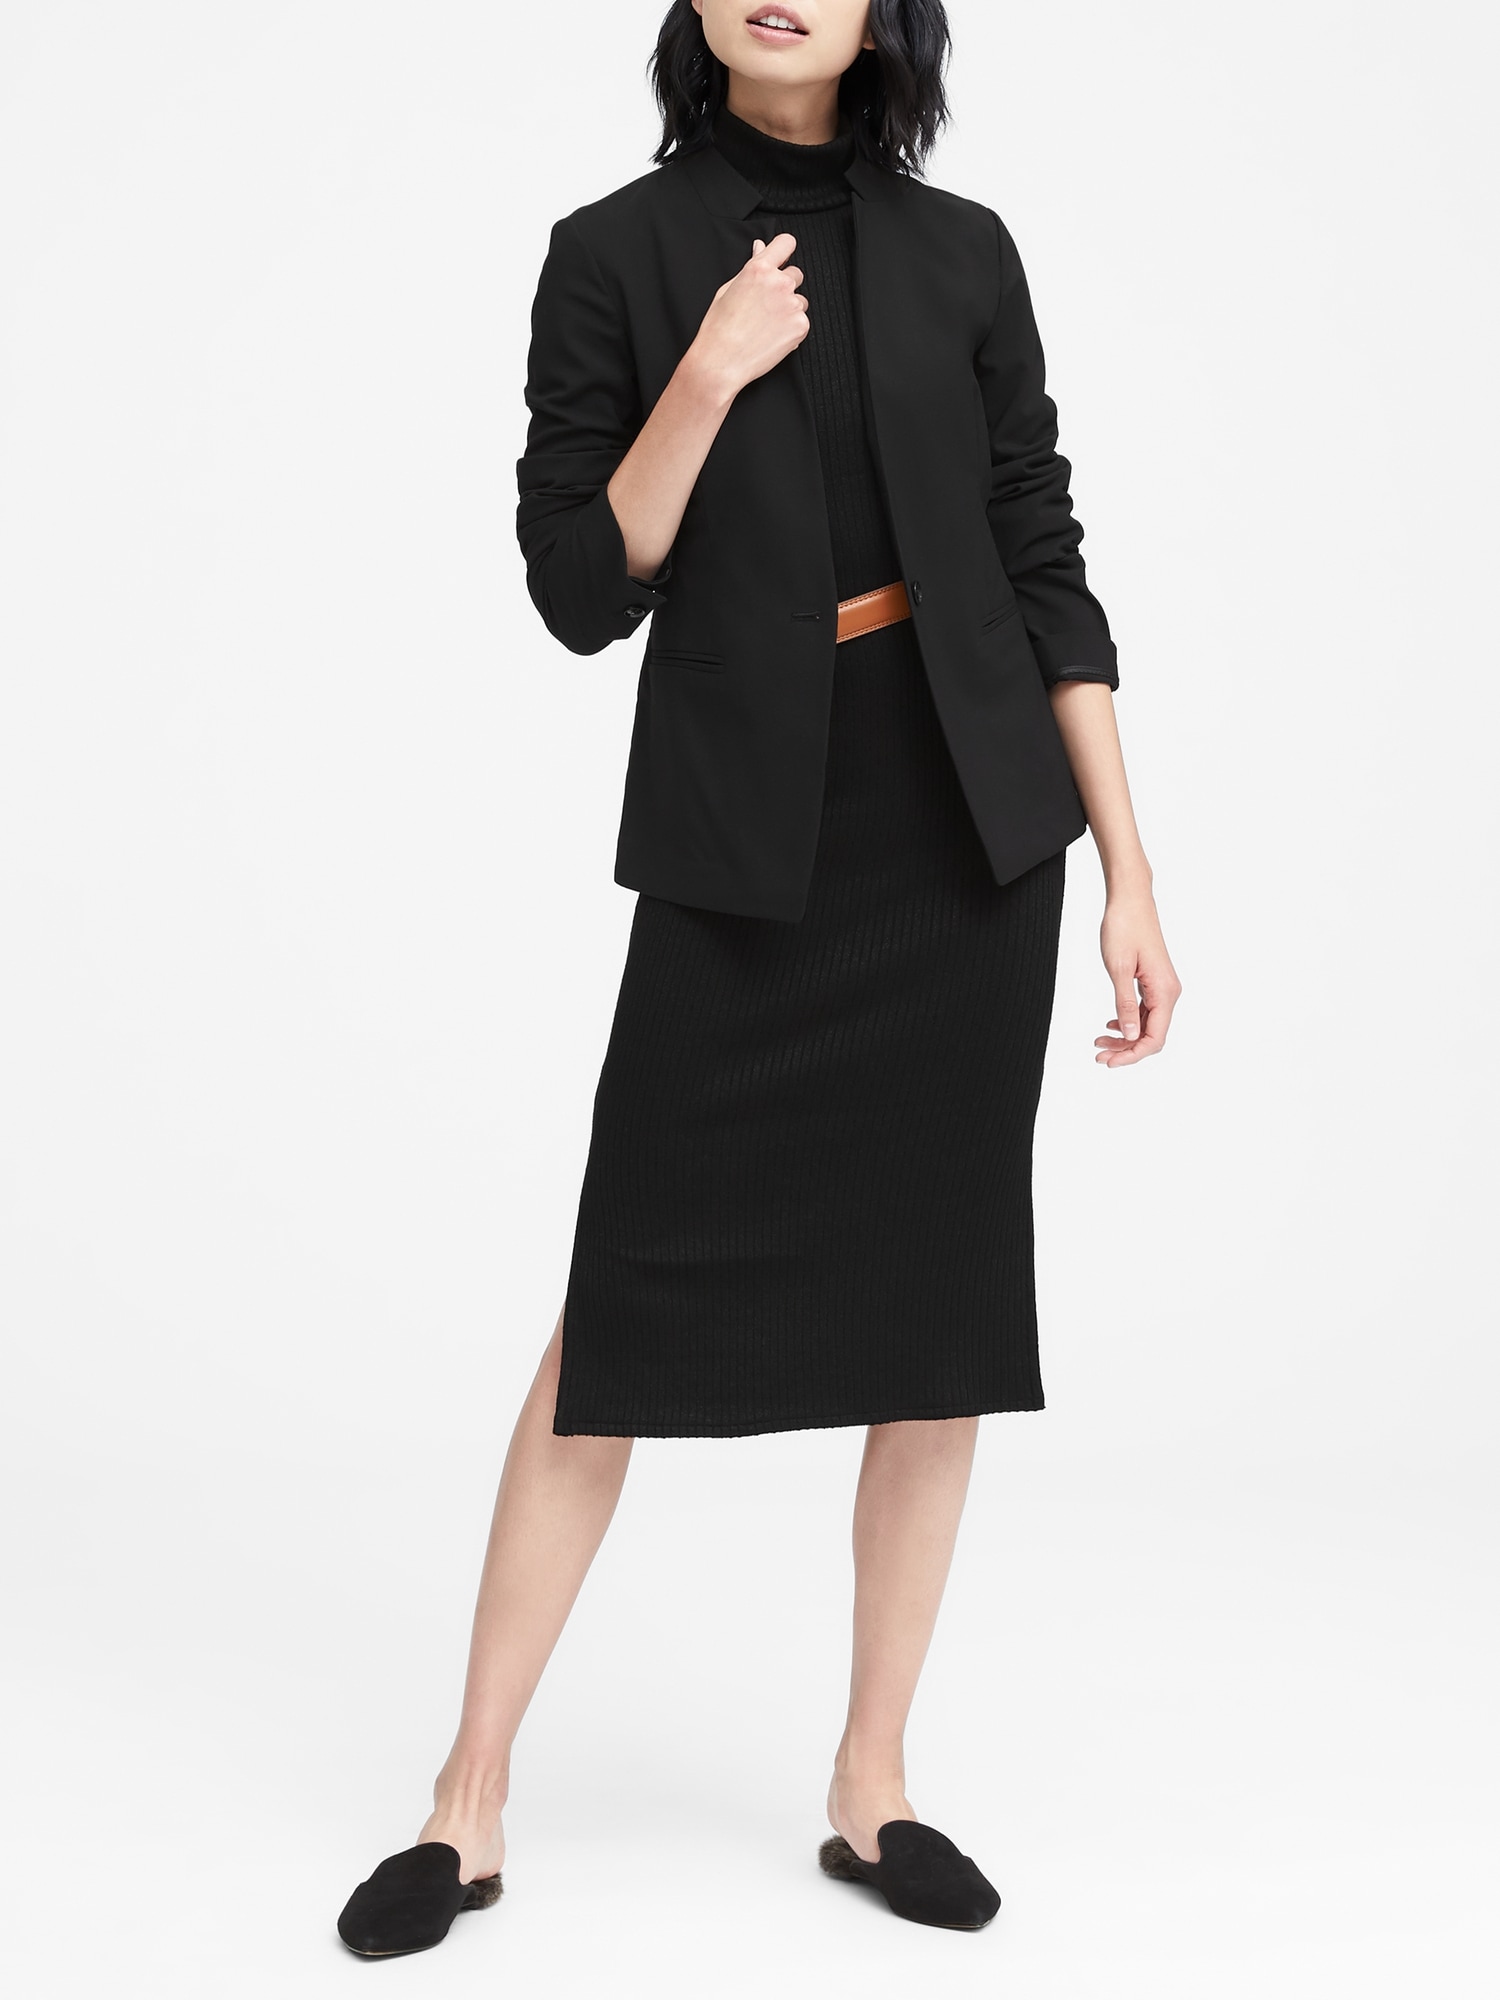 Long and Lean-Fit Lightweight Wool Blazer